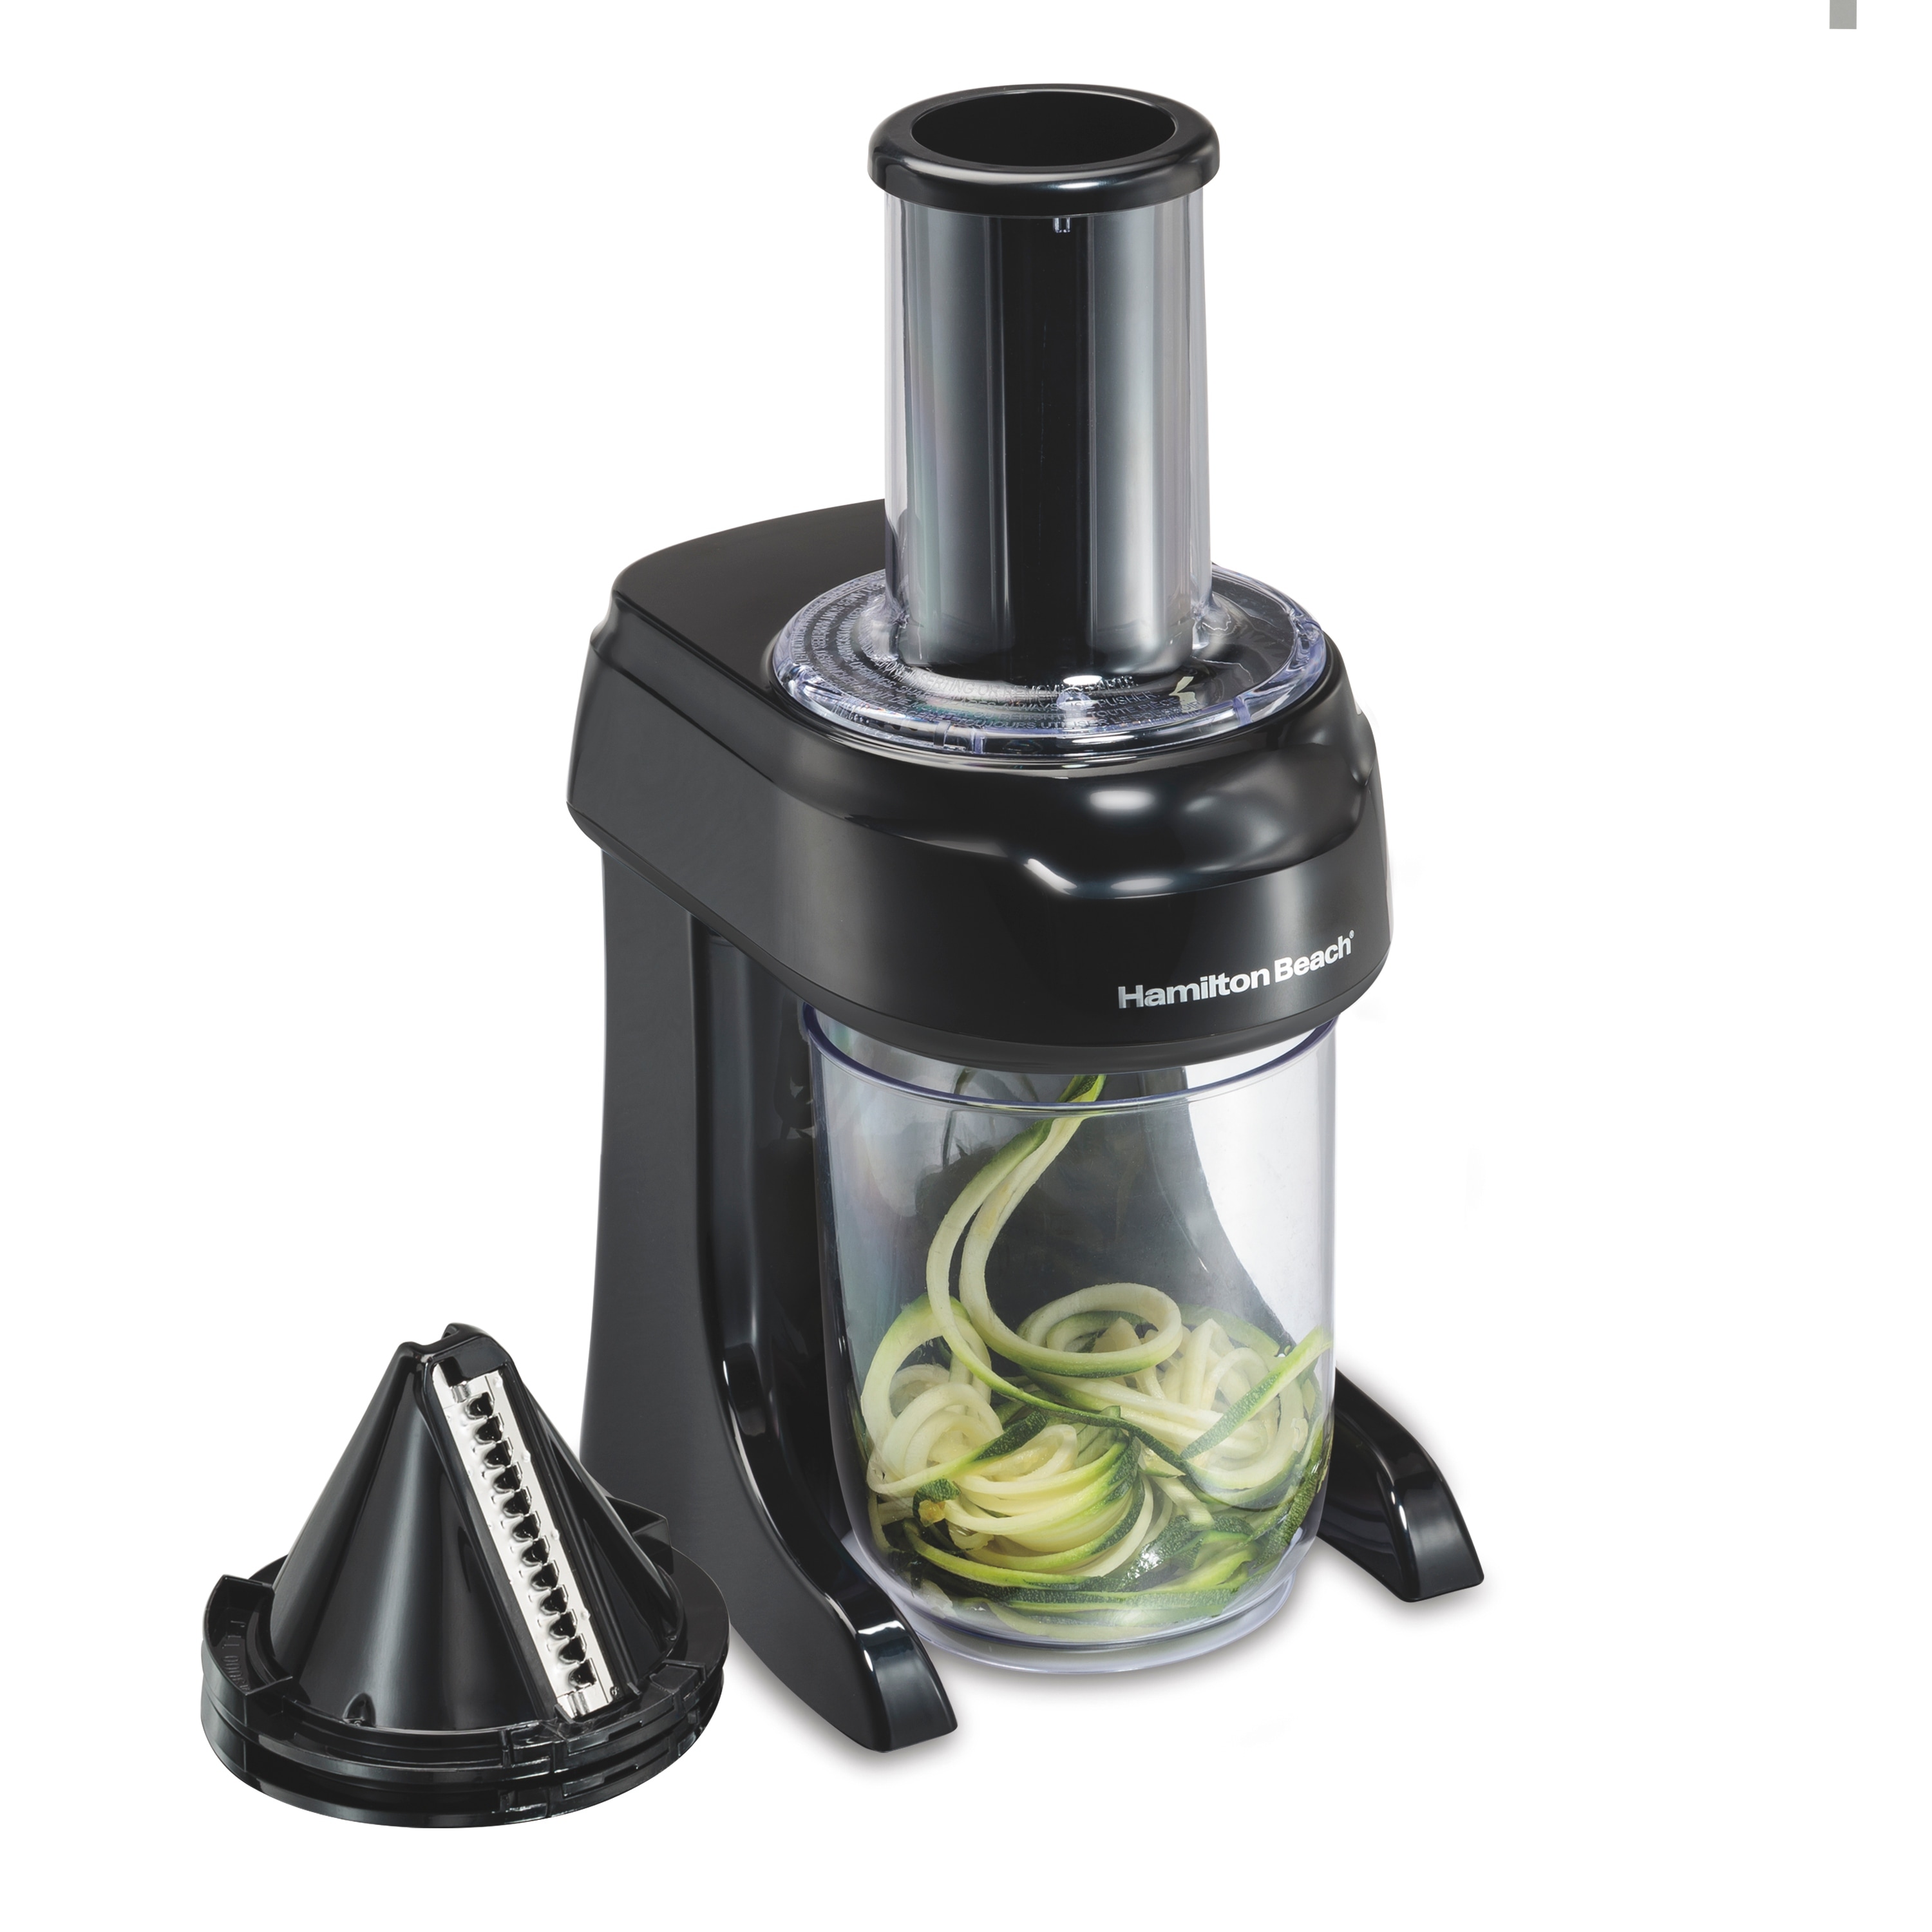 https://ak1.ostkcdn.com/images/products/is/images/direct/f637e40c8f6abe30f55e373c477b098232d9dfda/Hamilton-Beach-3-in-1-Electric-Spiralizer.jpg